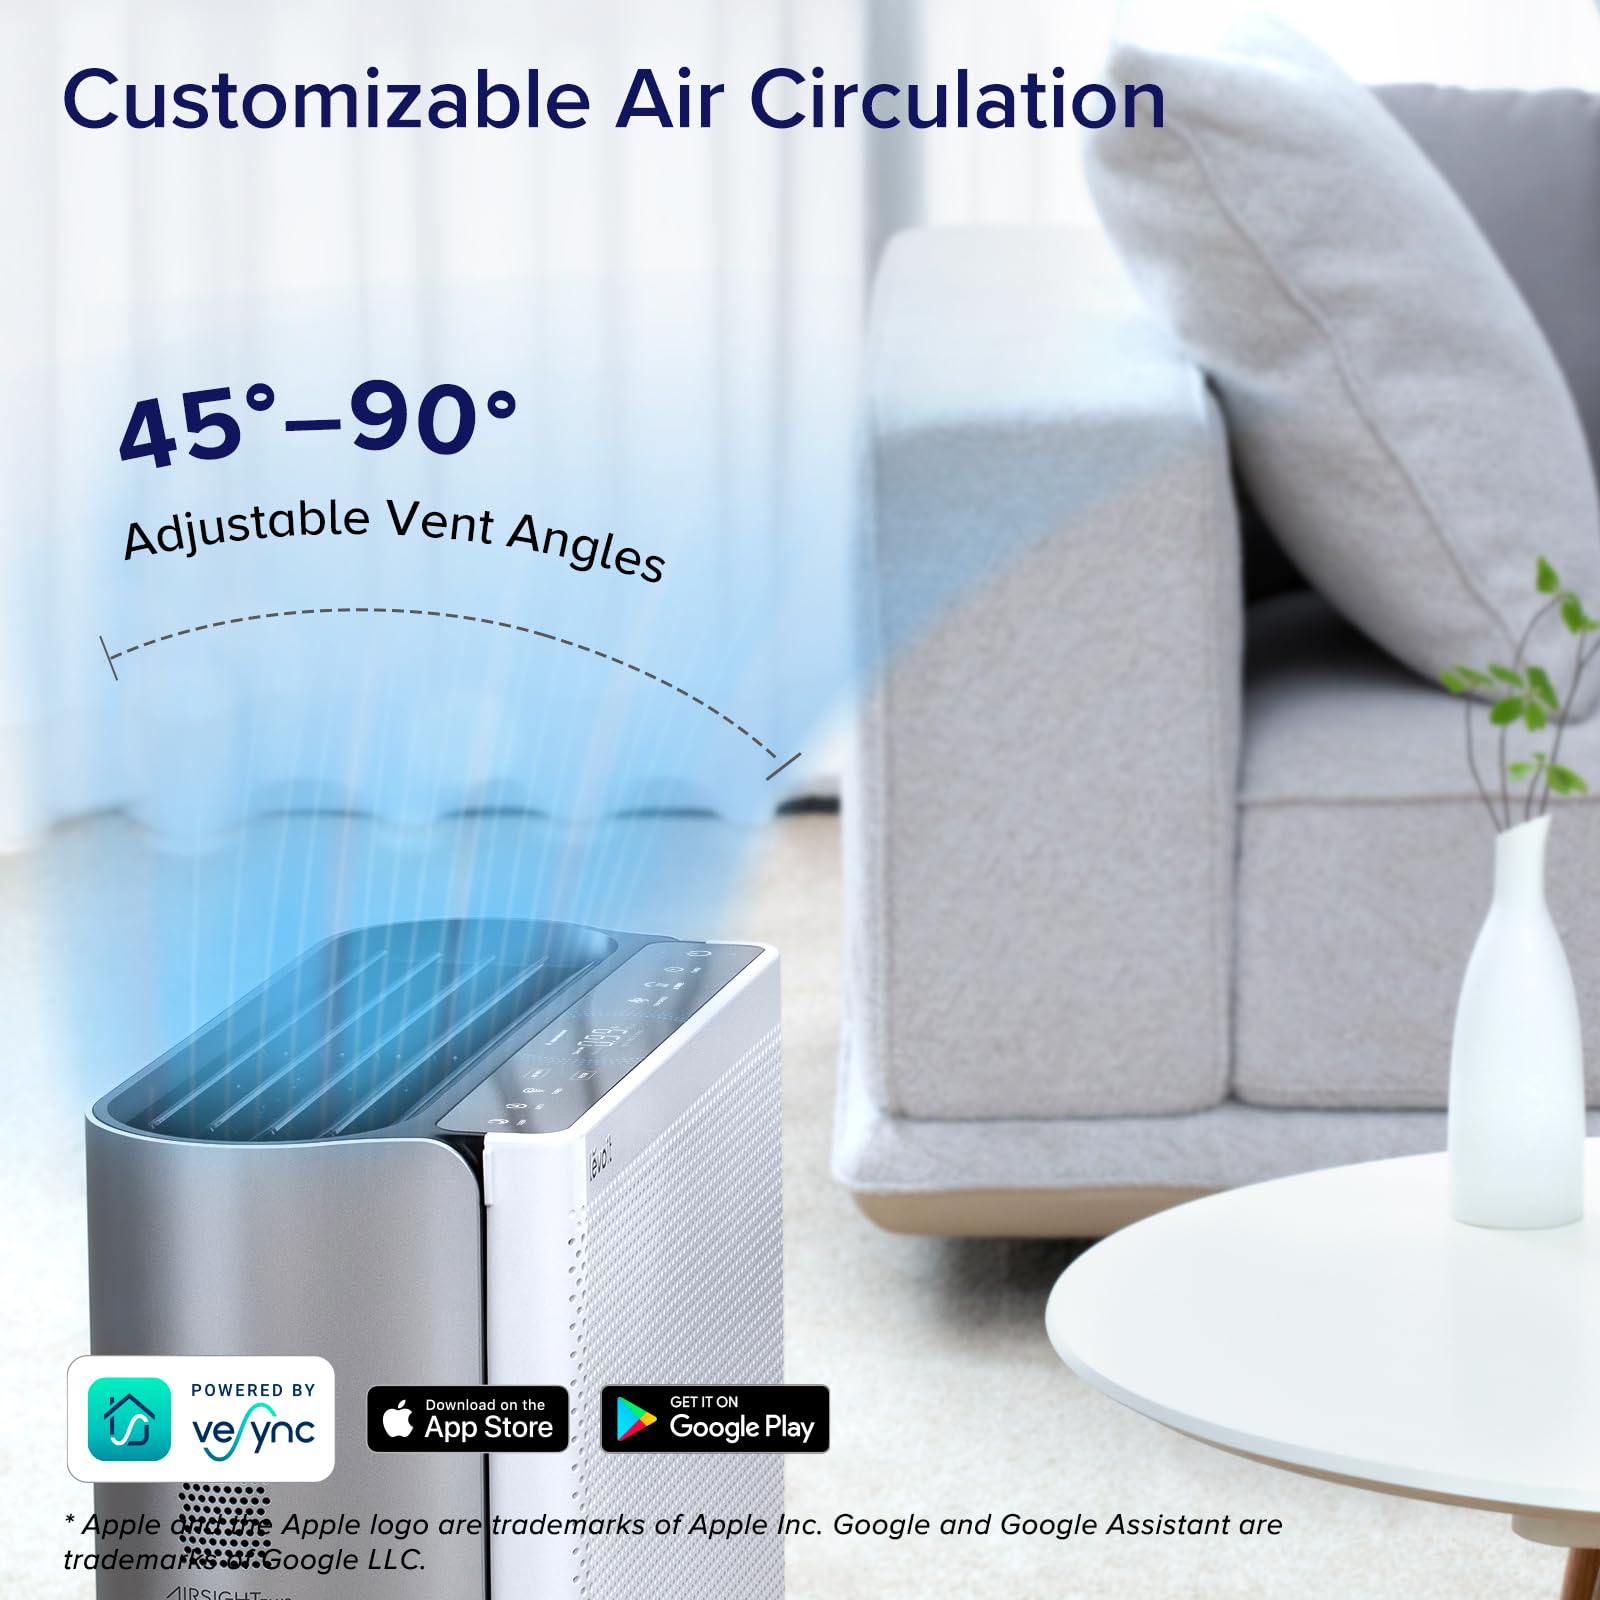 LEVOIT Air Purifiers for Home Large Room with Washable Filter, 3-Channel Air Quality Monitor, Smart WiFi and Filter for Pets, Allergies, Smoke, Dust, Pollen, Alexa Control, 2790 Ft², EverestAir